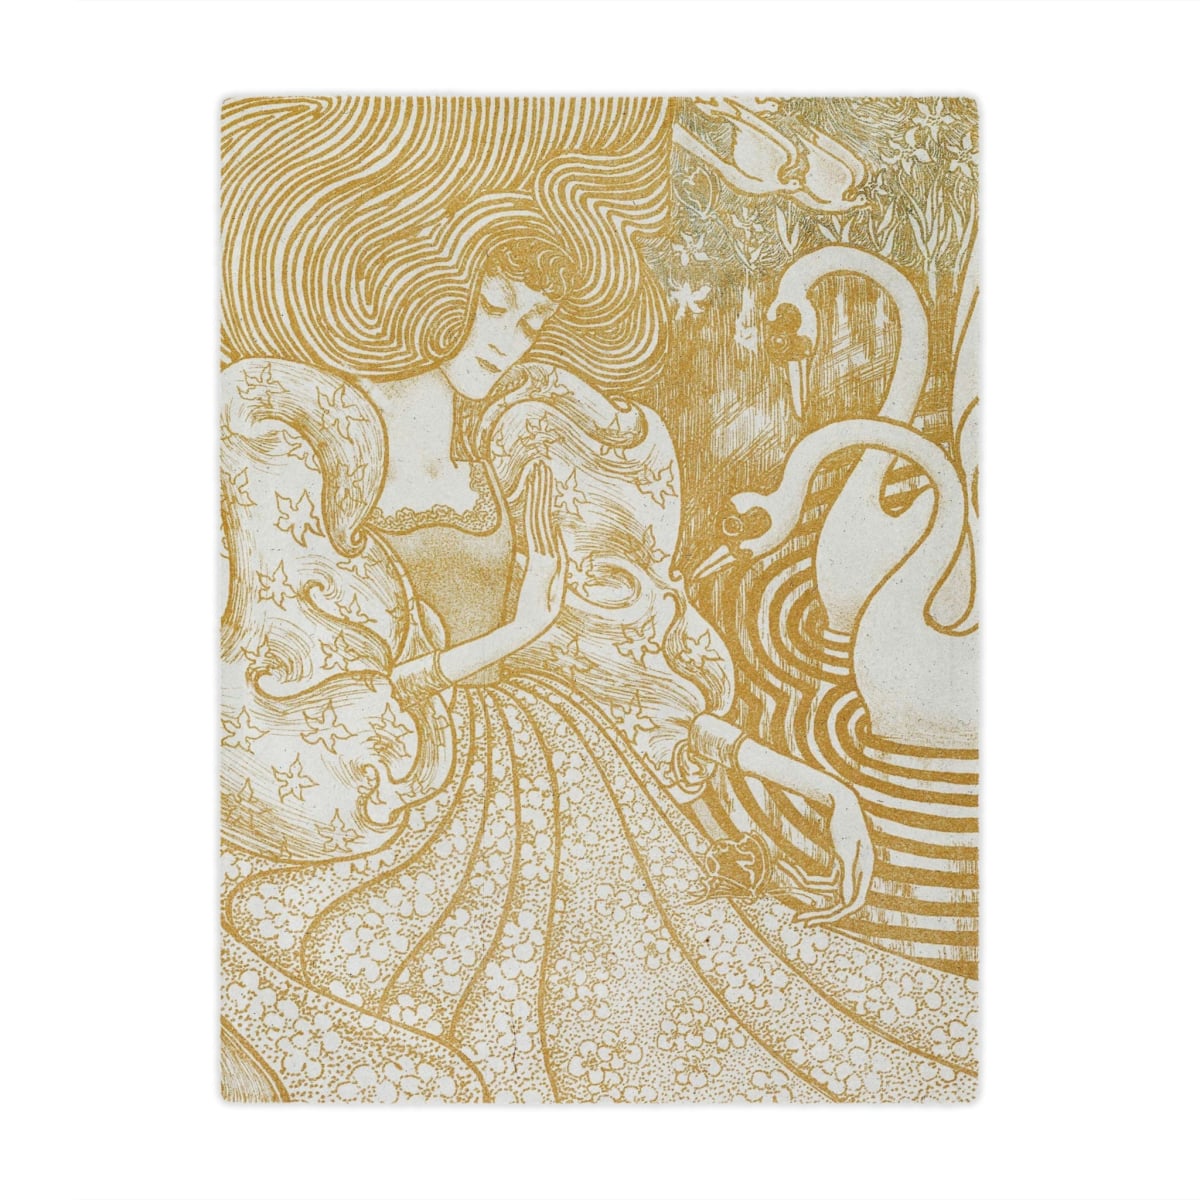 Jan Toorop painting blanket with woman and butterfly